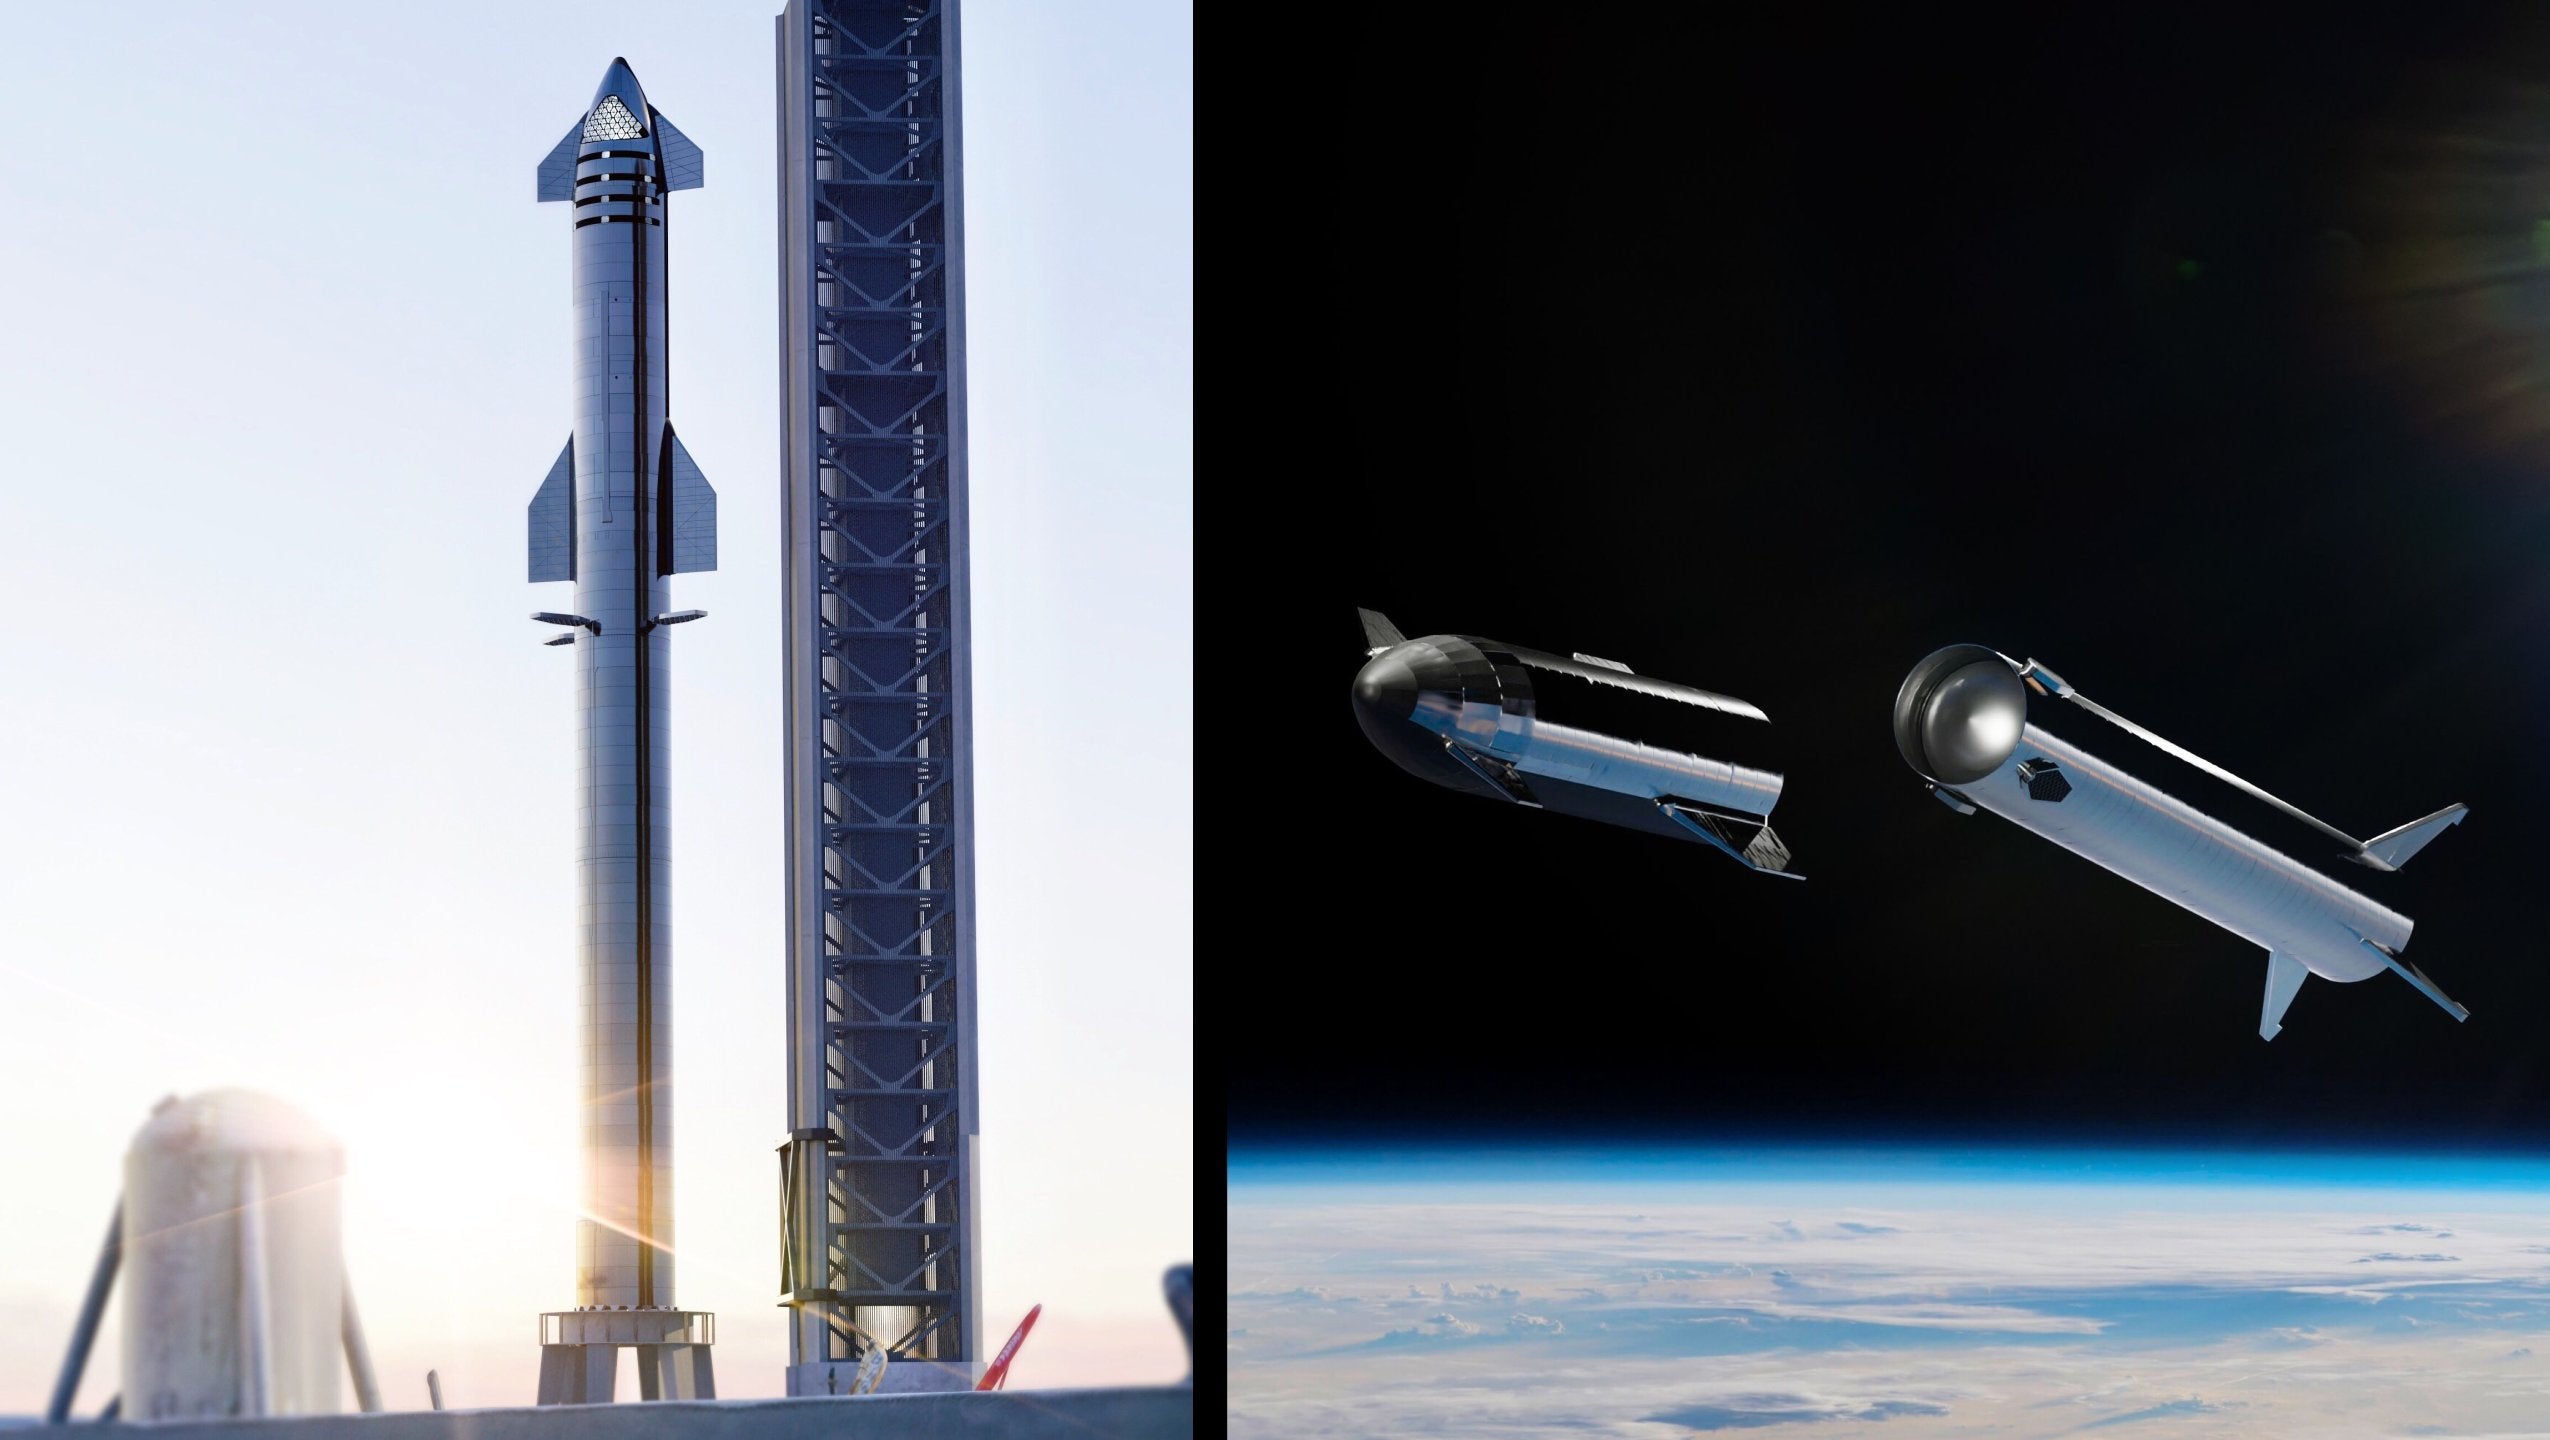 U.S. Military & SpaceX Are Researching How To Use Starship To Transport Cargo Around Earth